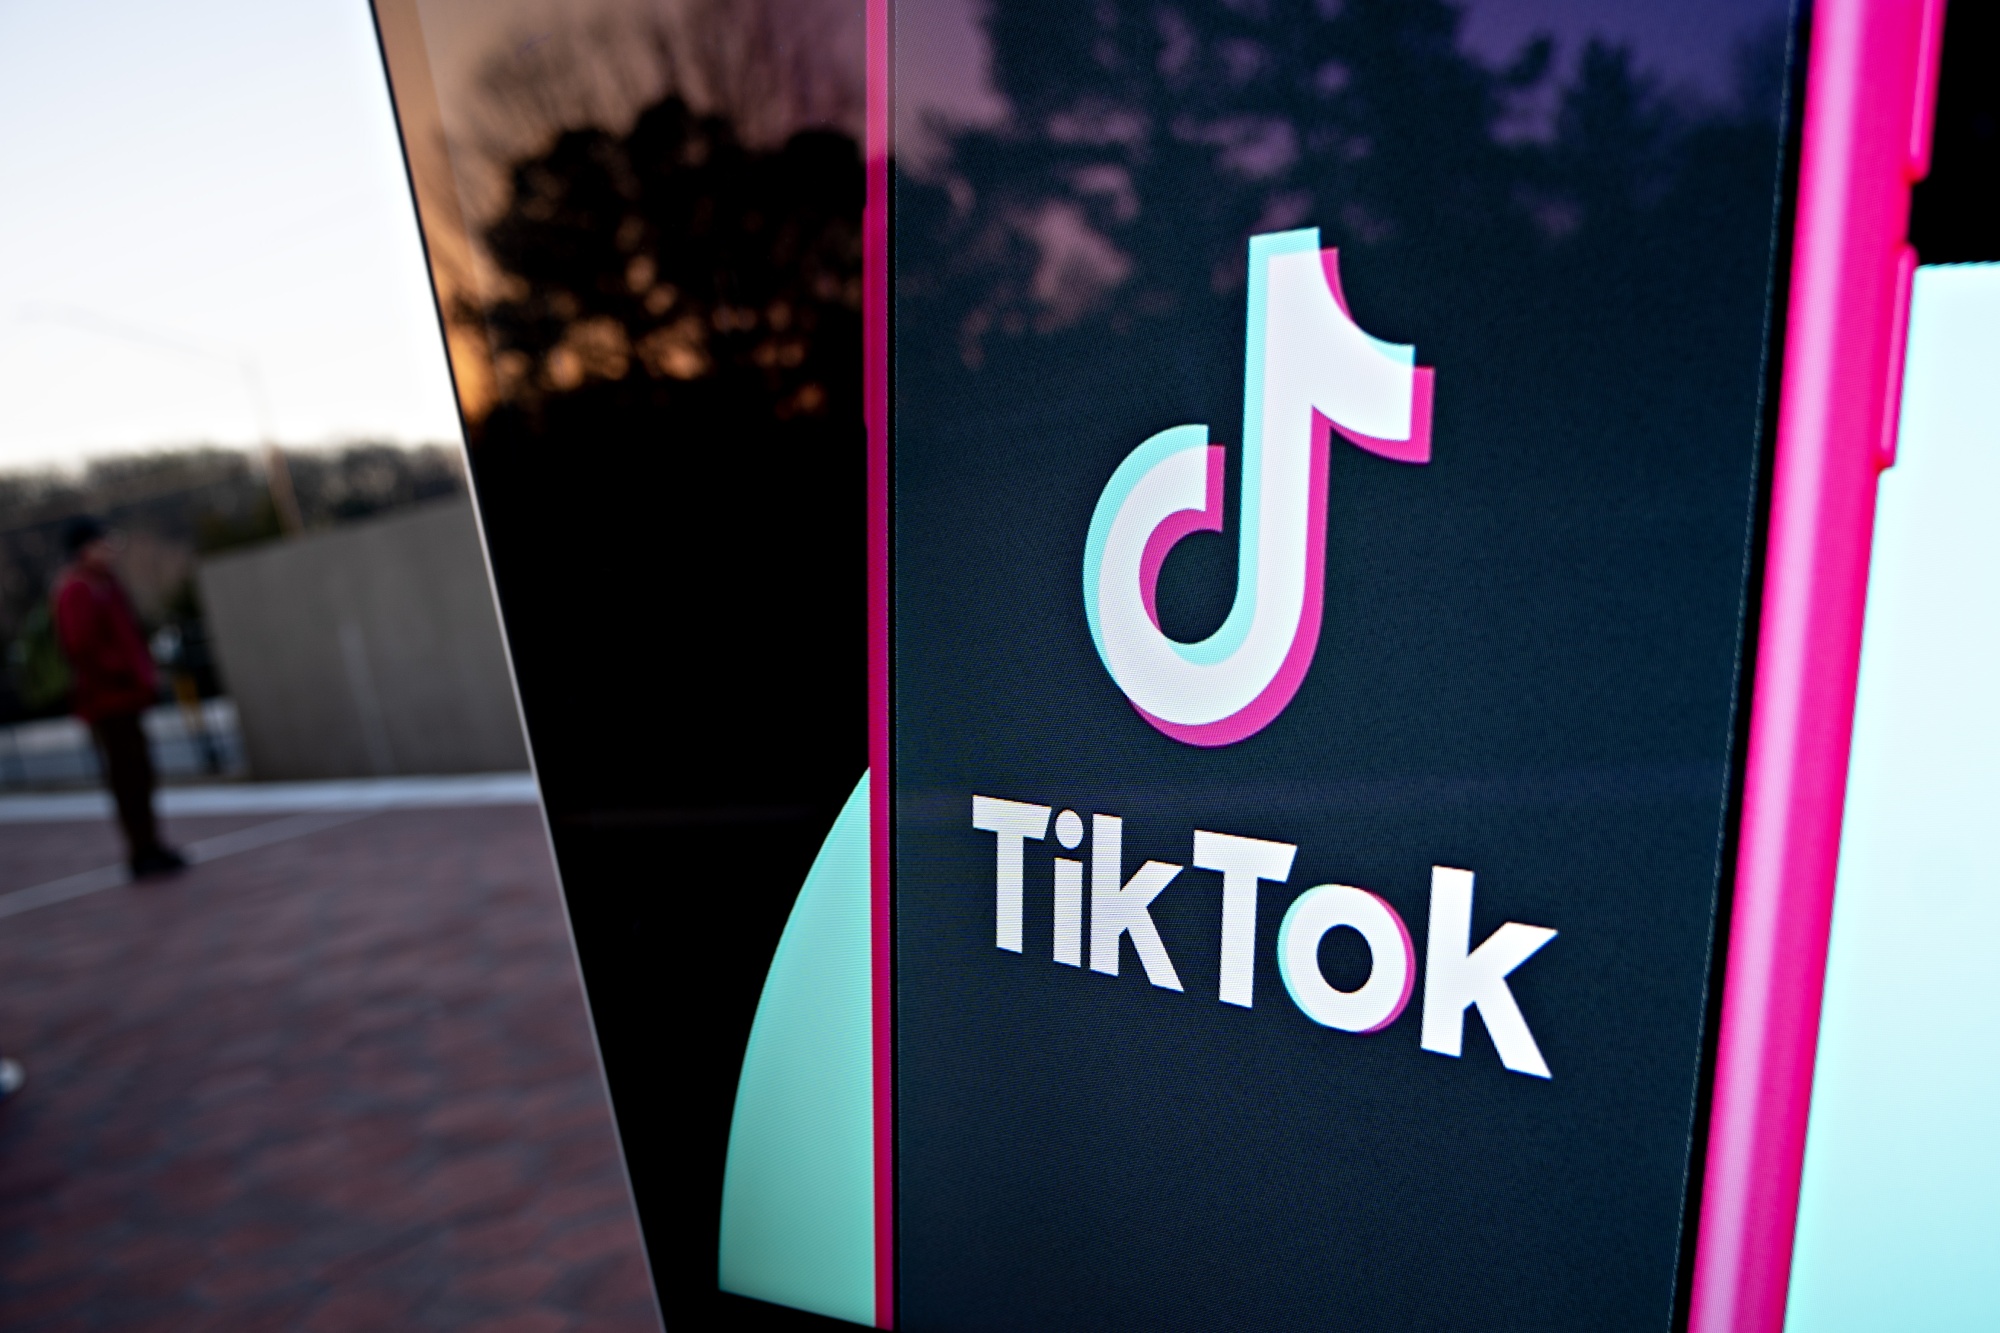 TikTok users create fake 'safety calls' to help protect each other